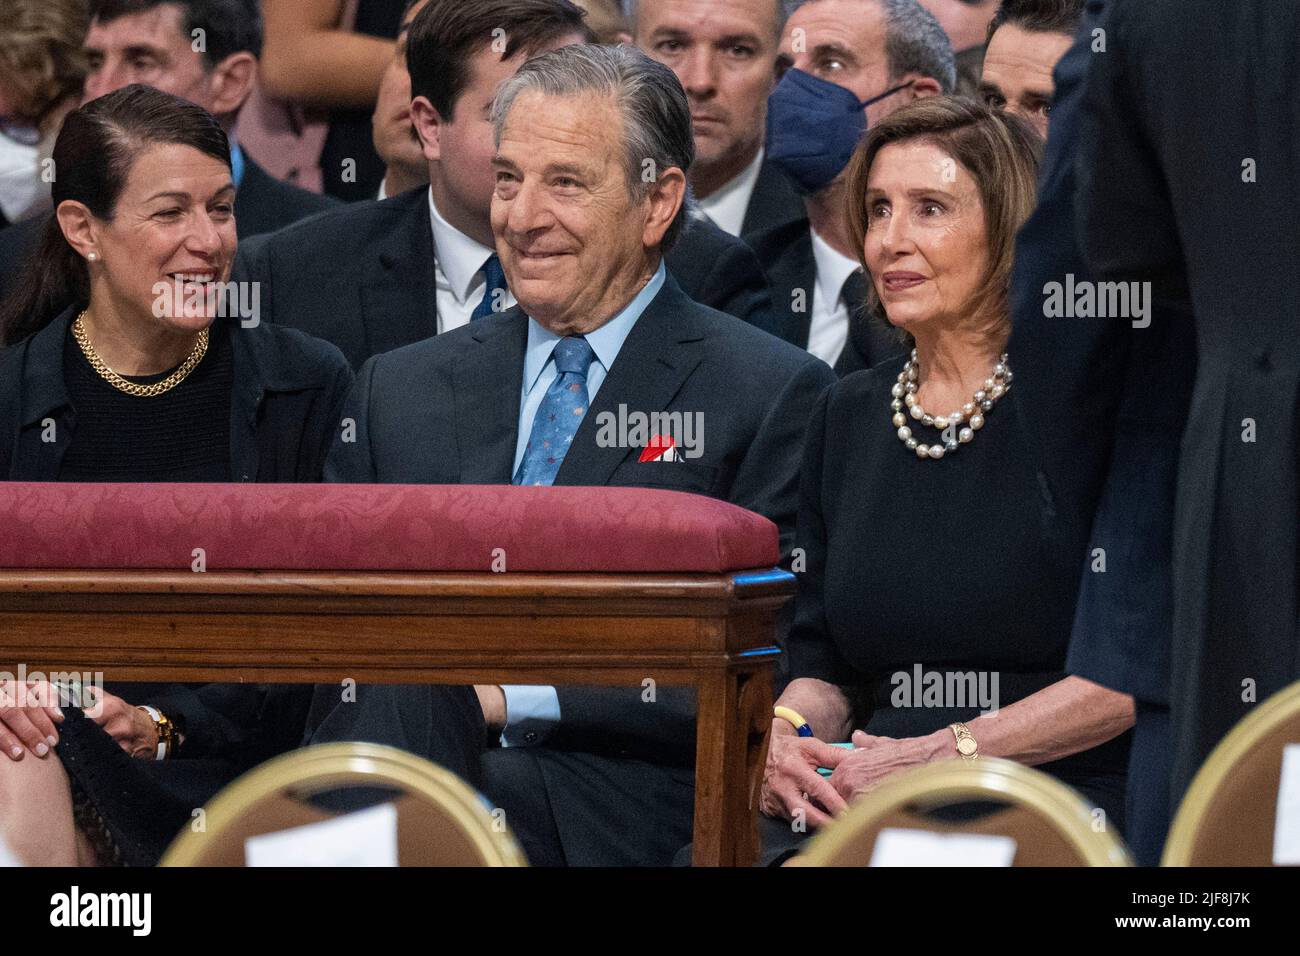 Vatican, Vatican. 29th June, 2022. US House of Representatives Speaker, Nancy Pelosi (R), with her husband Paul Pelosi (C), attend a Holy Mass for the Solemnity of Saints Peter and Paul lead by Pope Francis in St. Peter's Basilica. (Photo by Stefano Costantino/SOPA Images/Sipa USA) Credit: Sipa USA/Alamy Live News Stock Photo